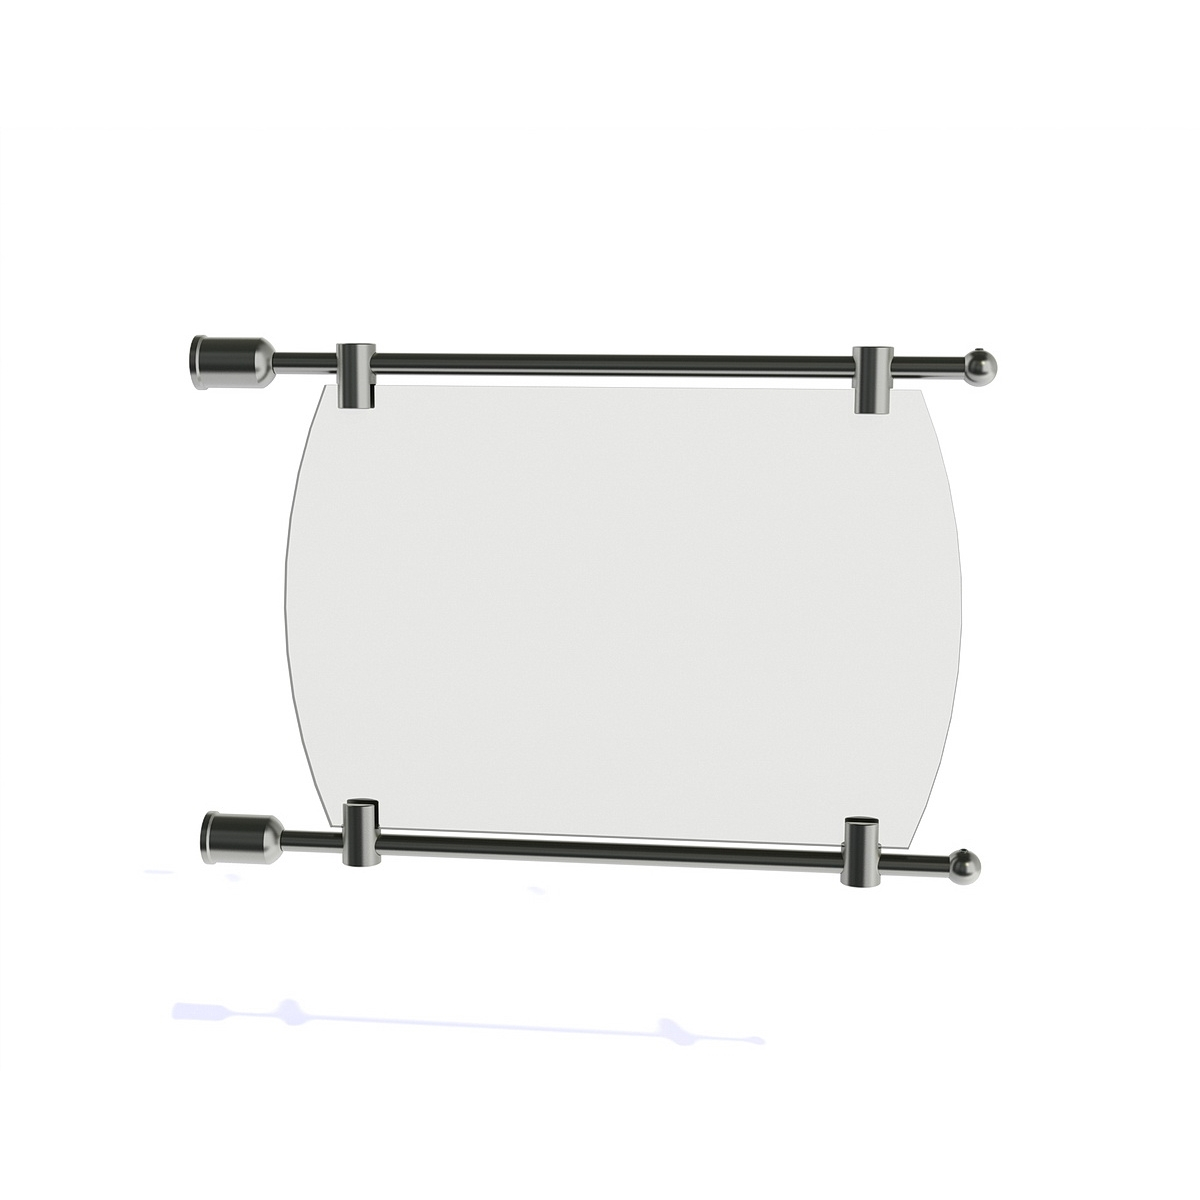 Set of 2, 3/8'' Diameter Rod Projecting Sign, Aluminum Clear Anodized, 13 13/16'' for Material thickness up to 5/16''